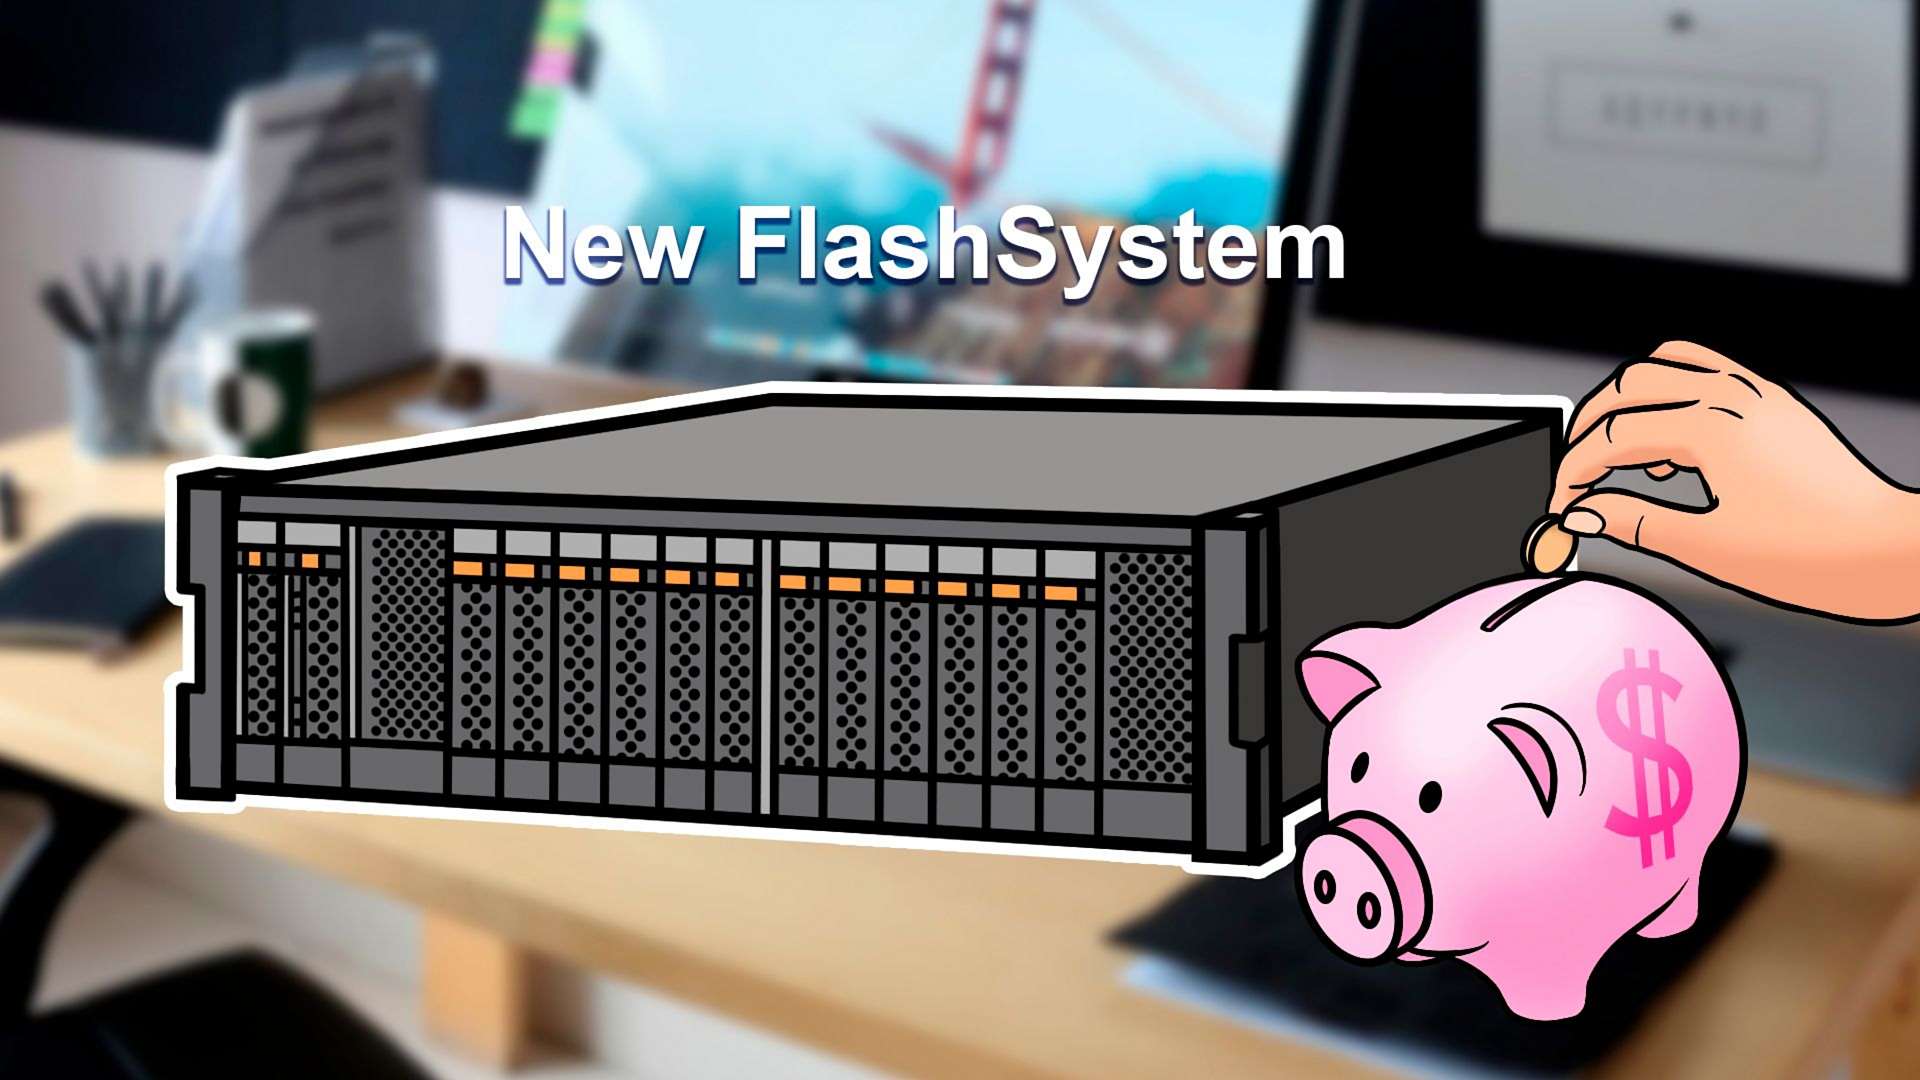 New IBM FlashSystem 840 allows to store in rack up to petabyte